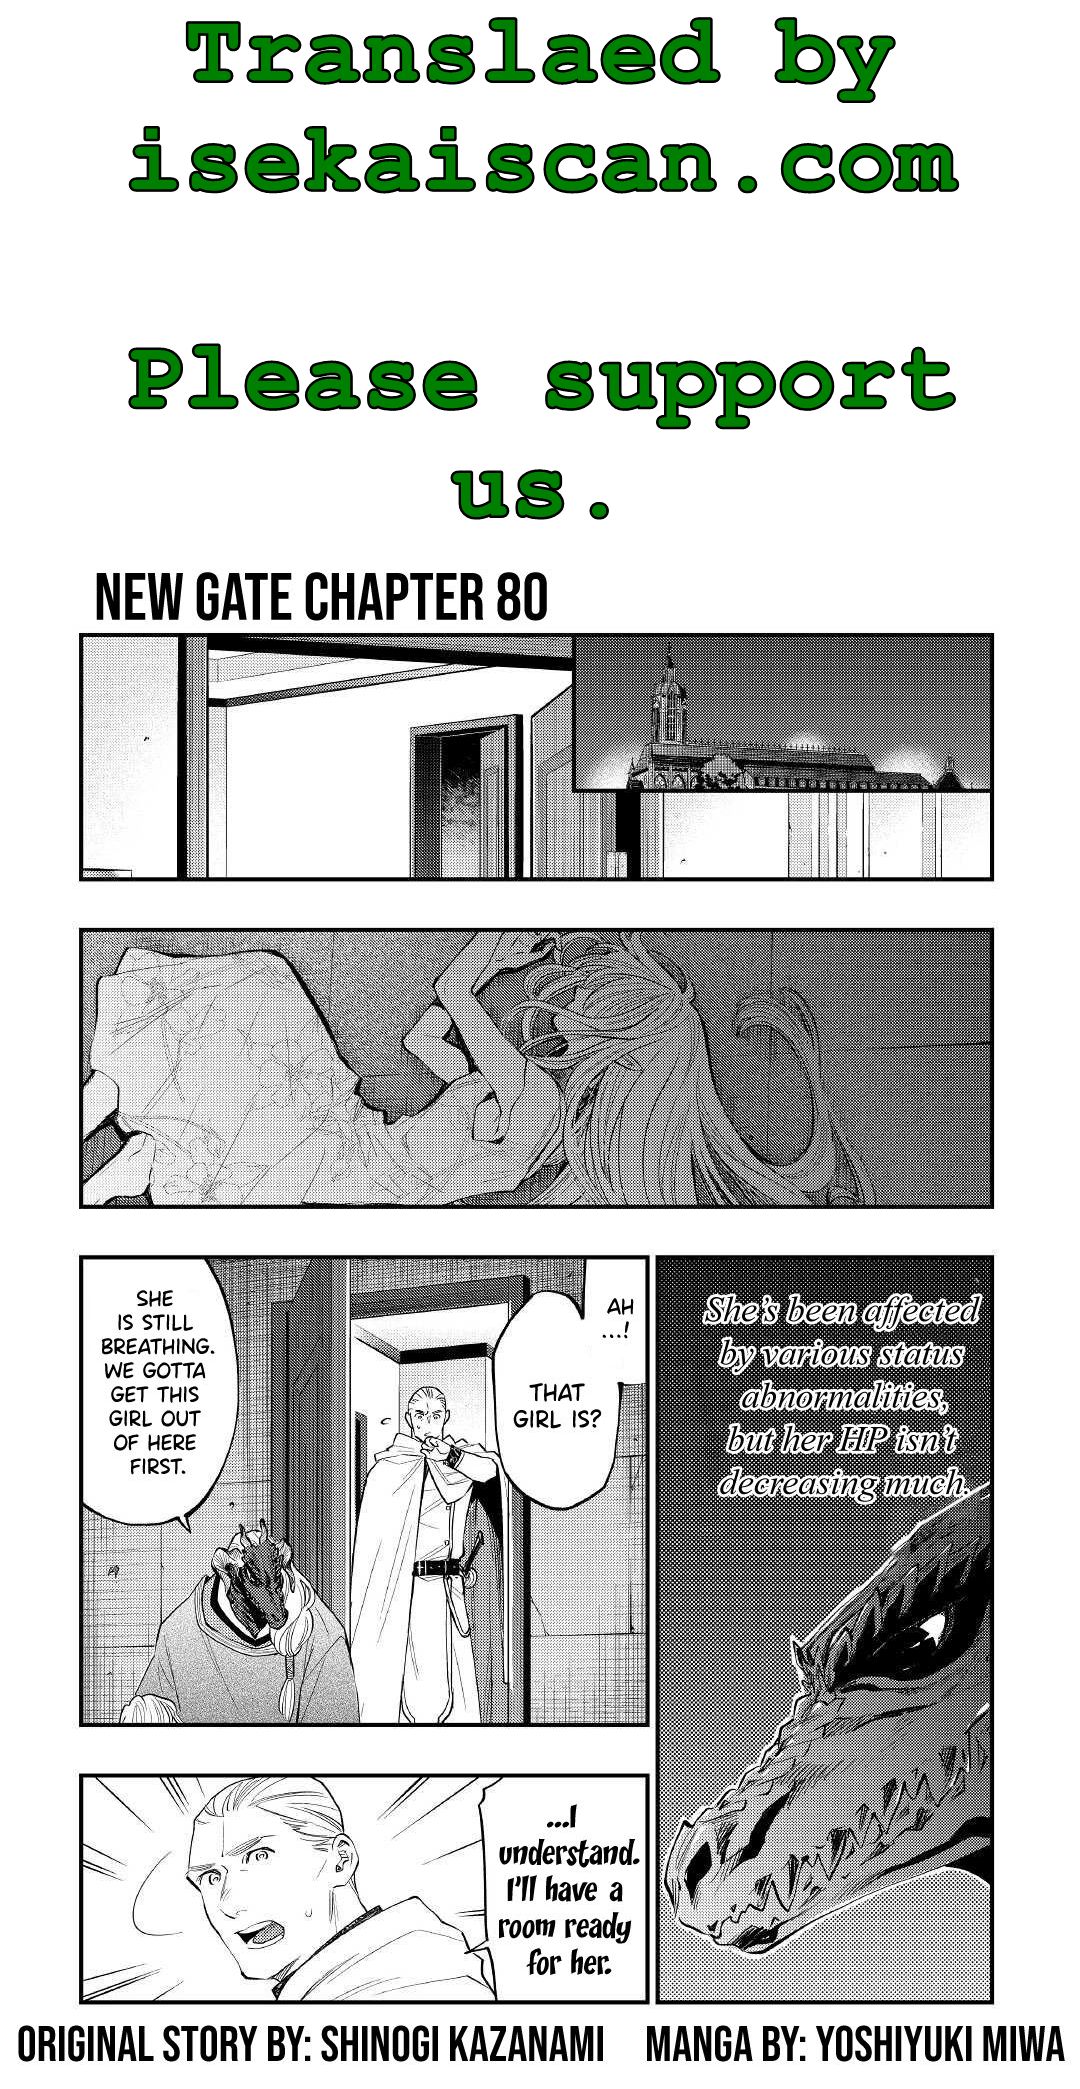 The New Gate Chapter 80 #9